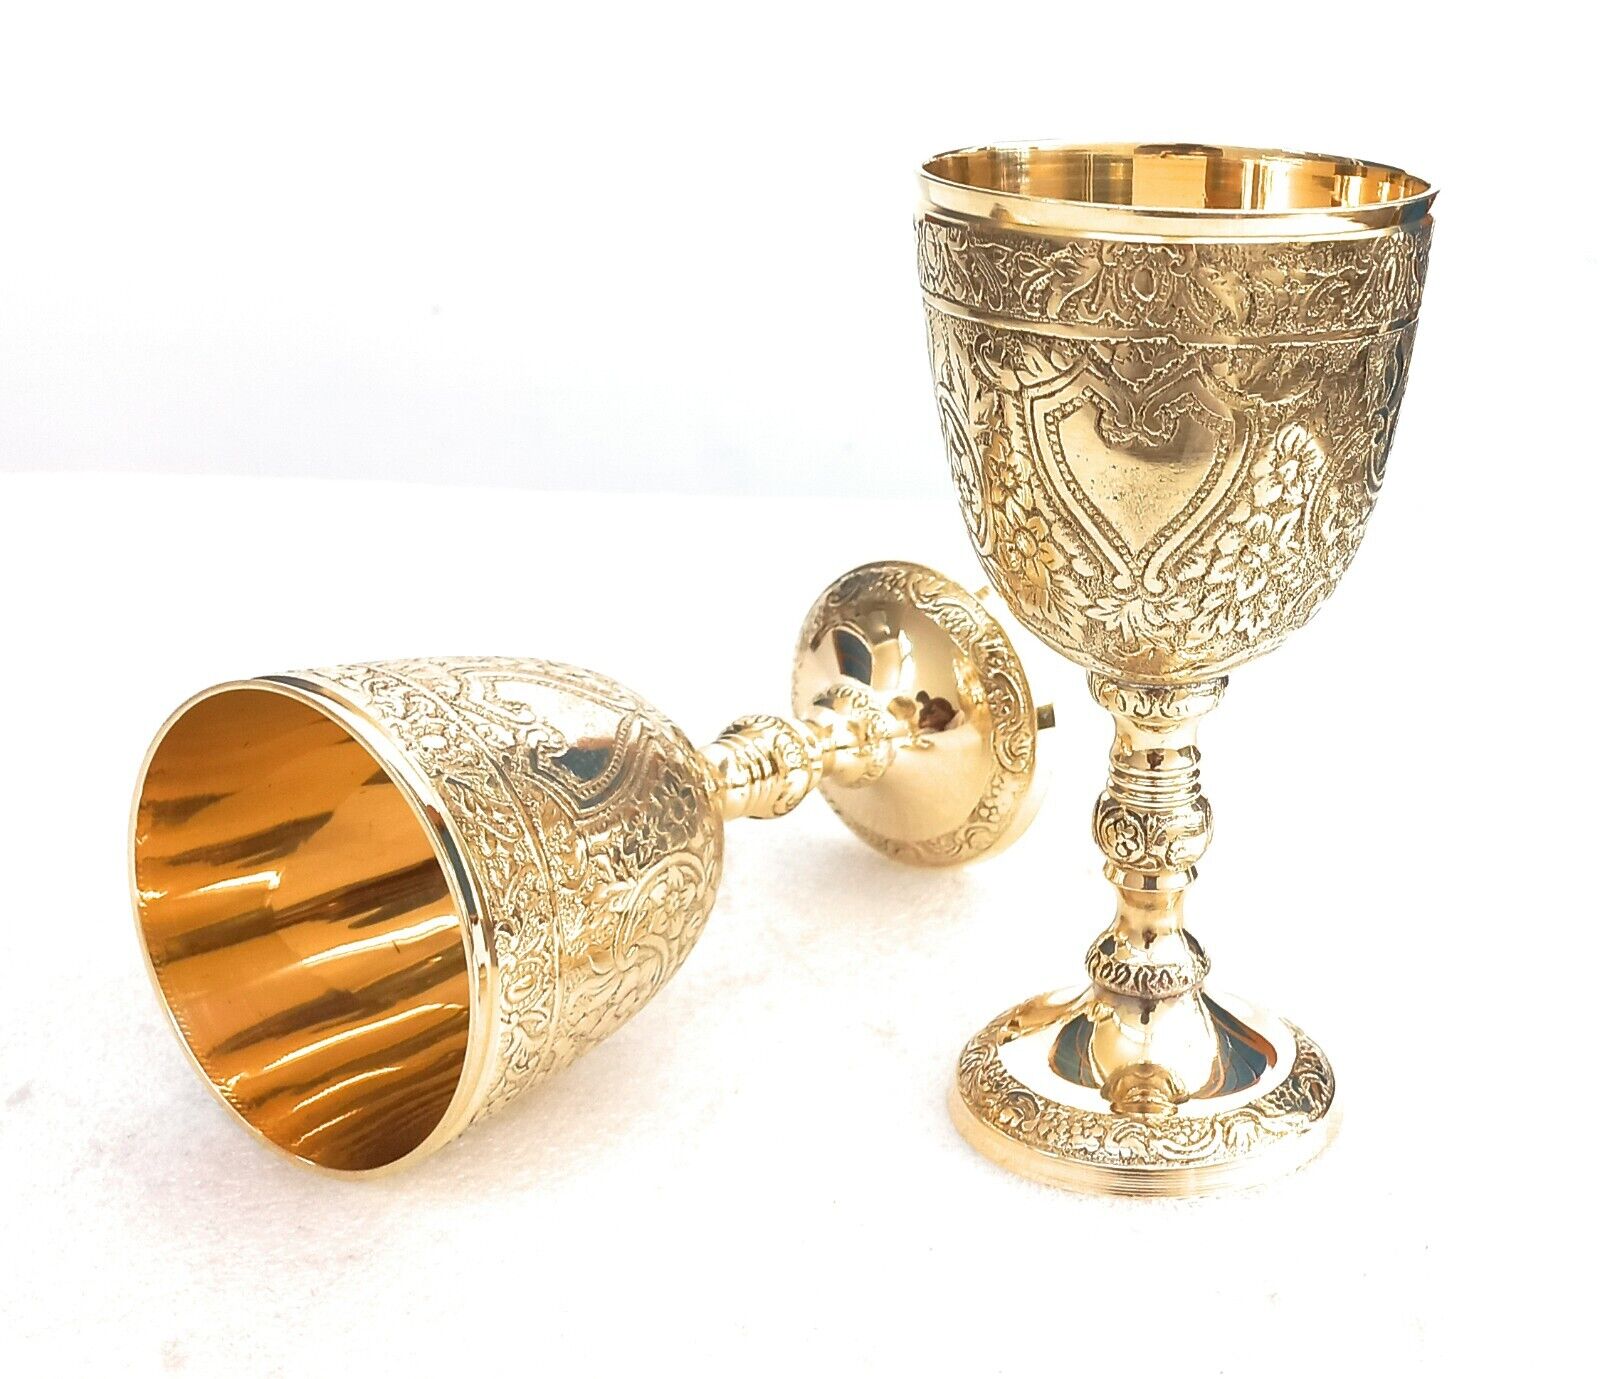 Vintage Chalice Goblet Set of 2 Royal King Arthur Wine Cup Games of Thrones Gift